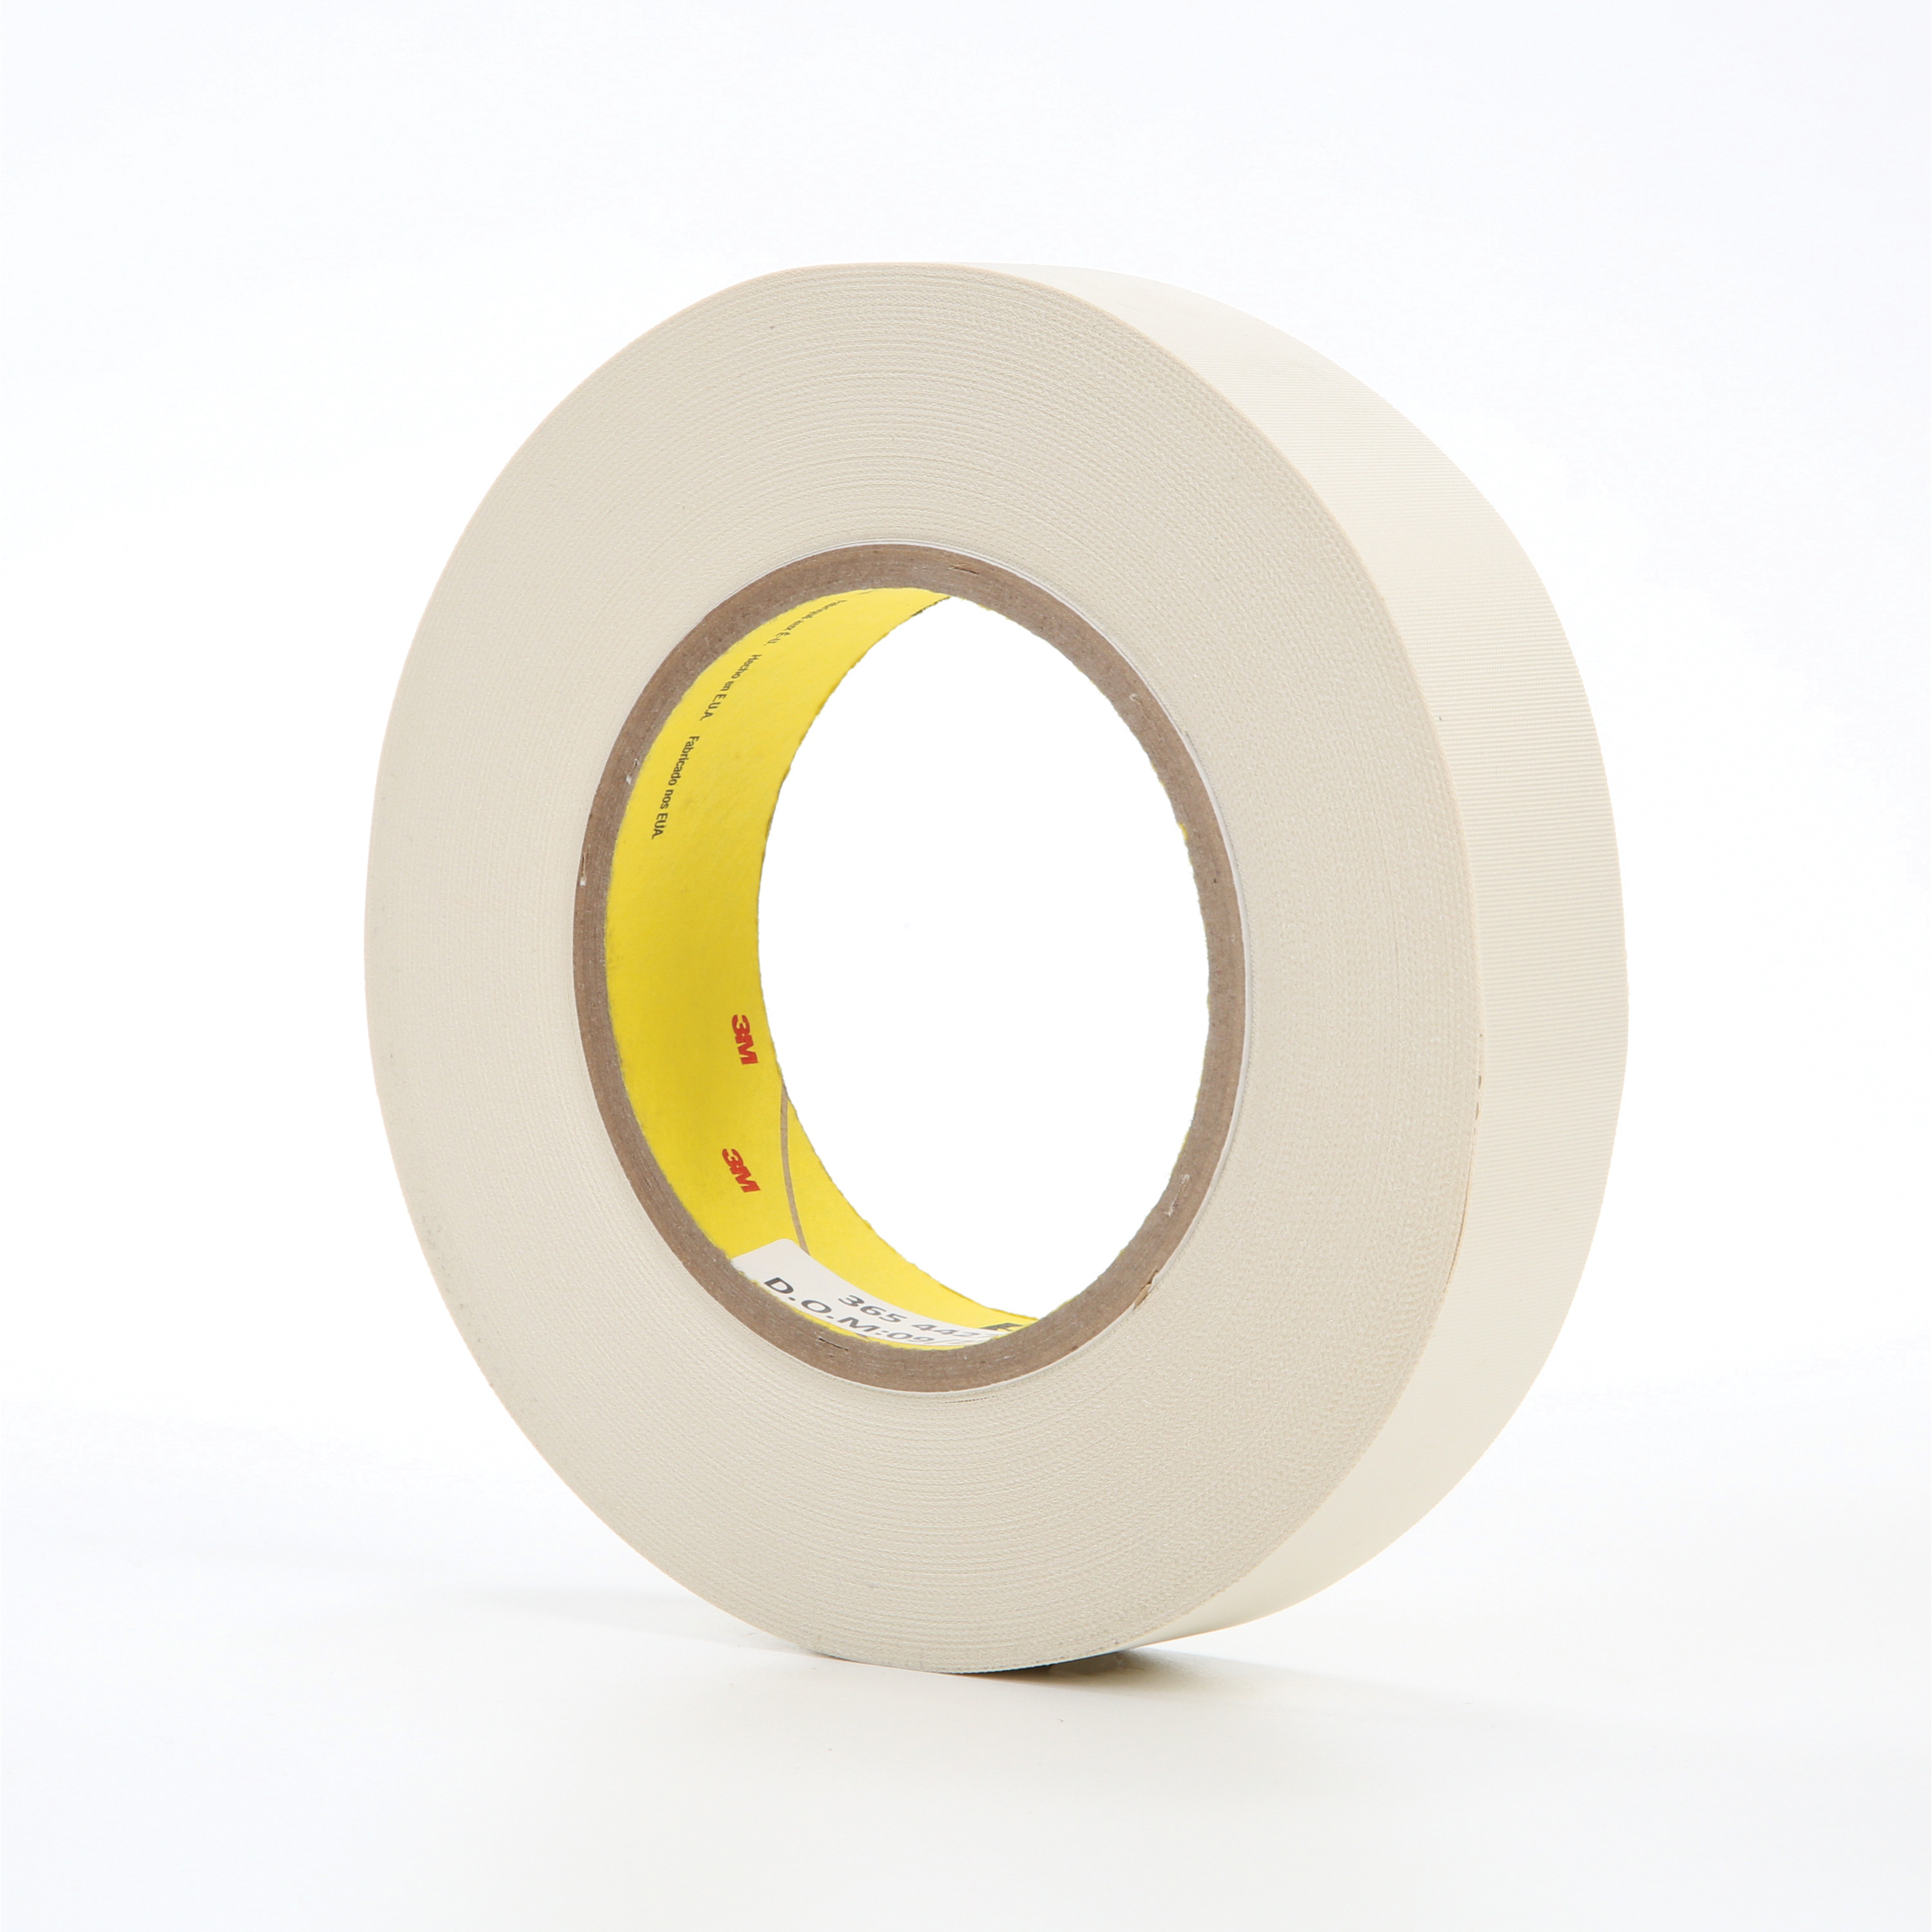 3M™ 021200-03020 Cloth Tape, 60 yd L x 1 in W, 8.3 mil THK, Thermoset Rubber Resin Adhesive, Glass Cloth Backing, White